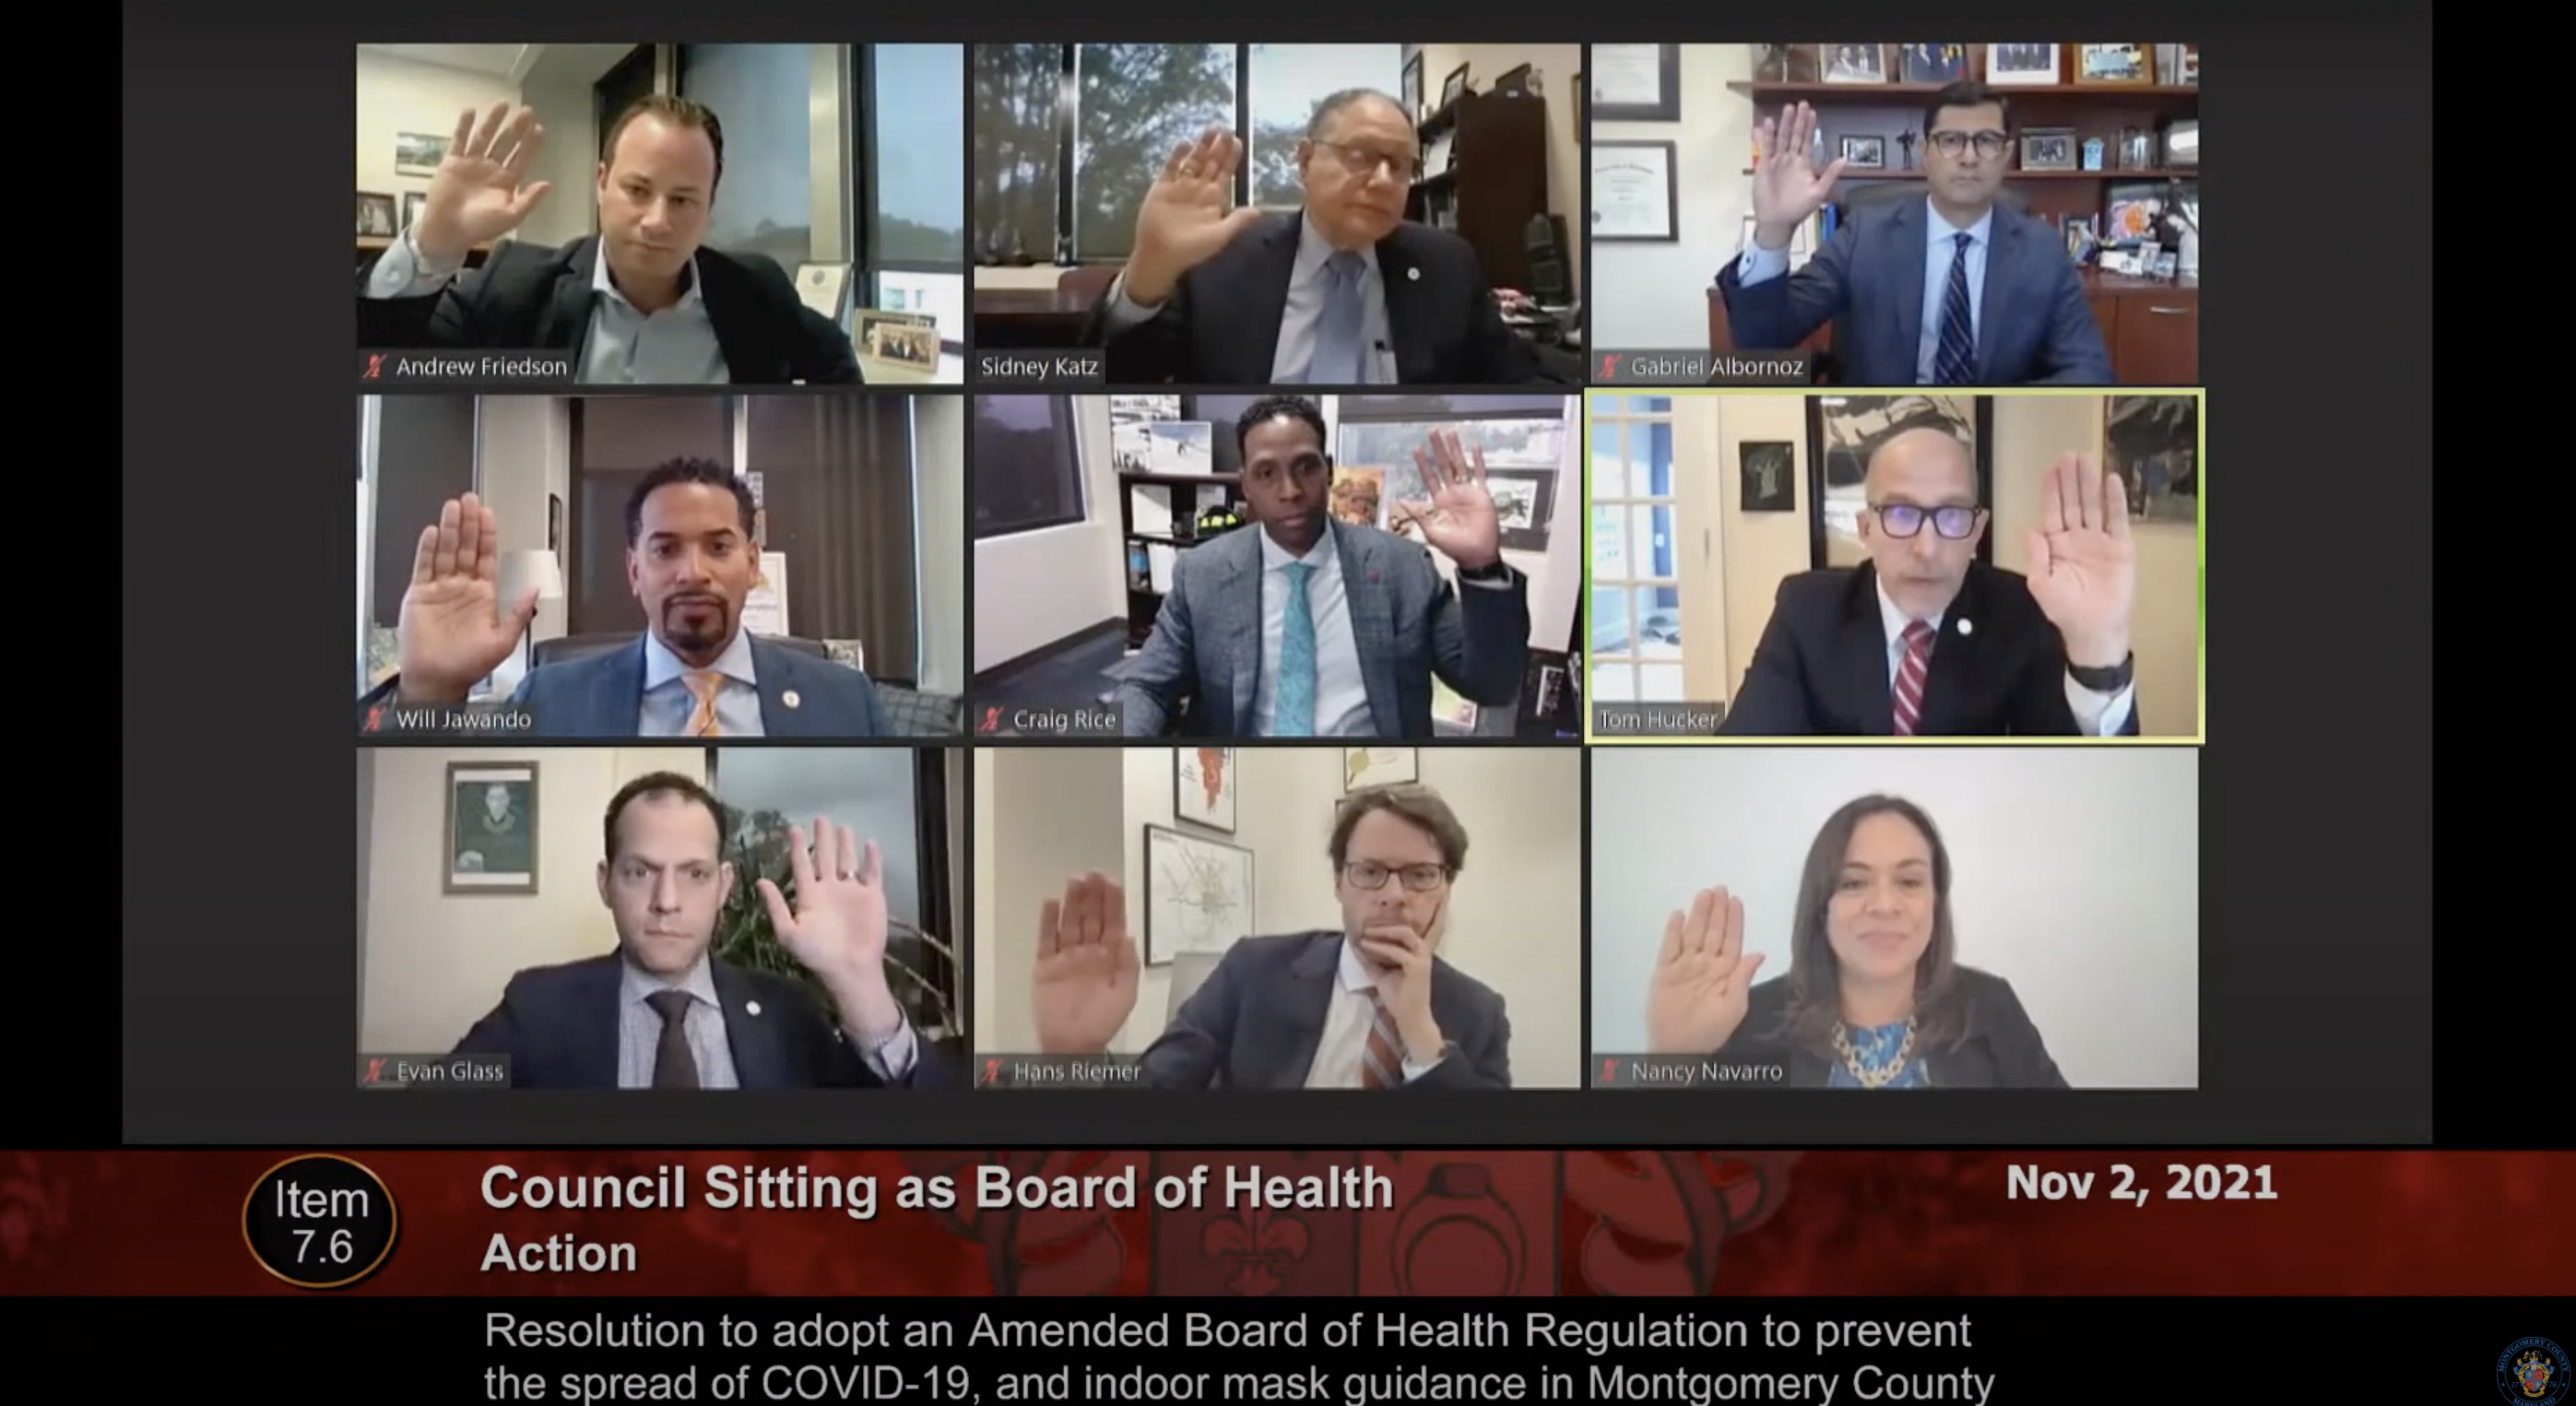 A screenshot of the virtual council hearing in which each council member is raising their hand over Zoom.